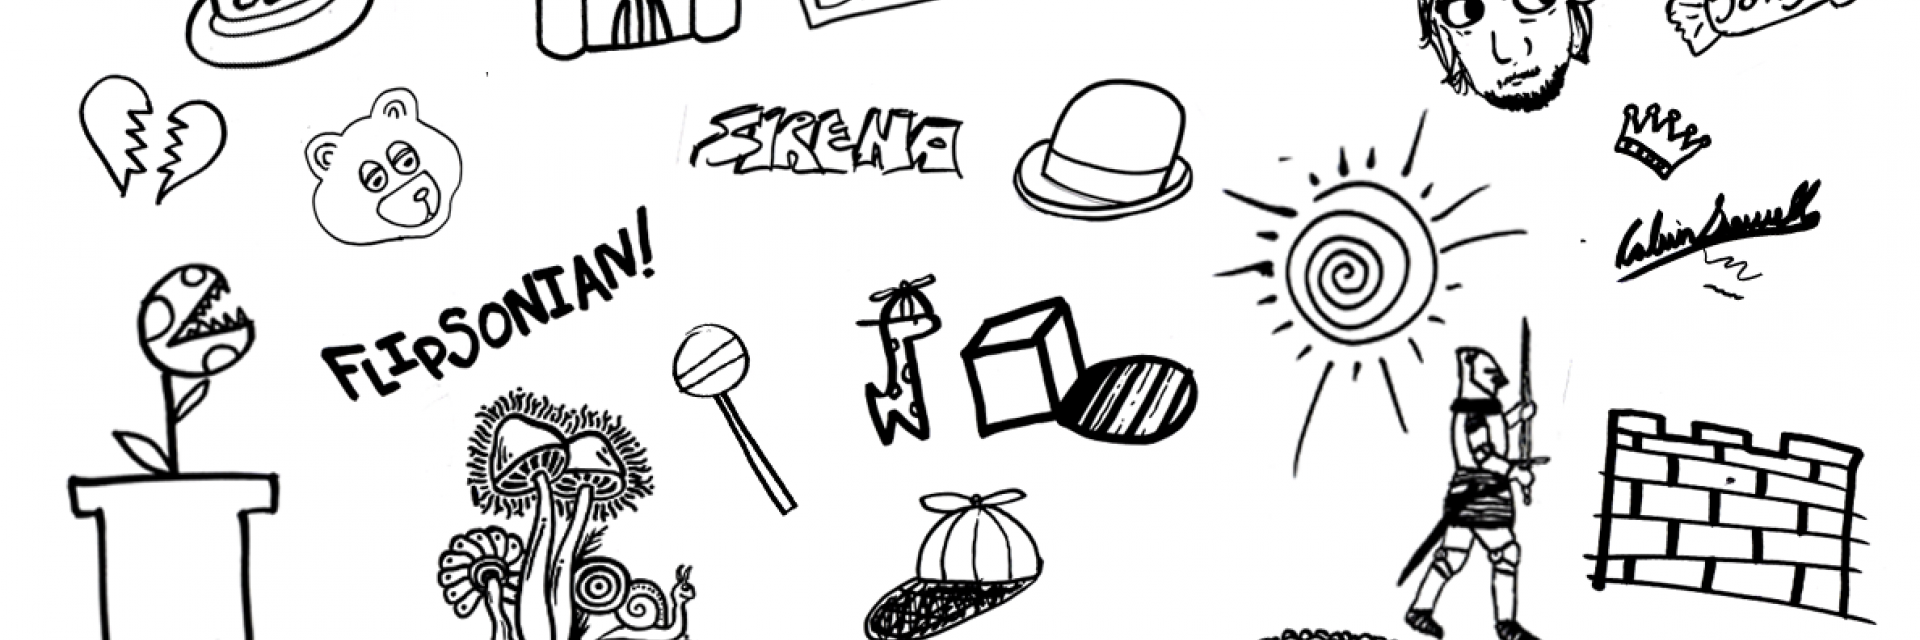 black ink cartoon doodles on white background with "Flipsonian" text in the middle left